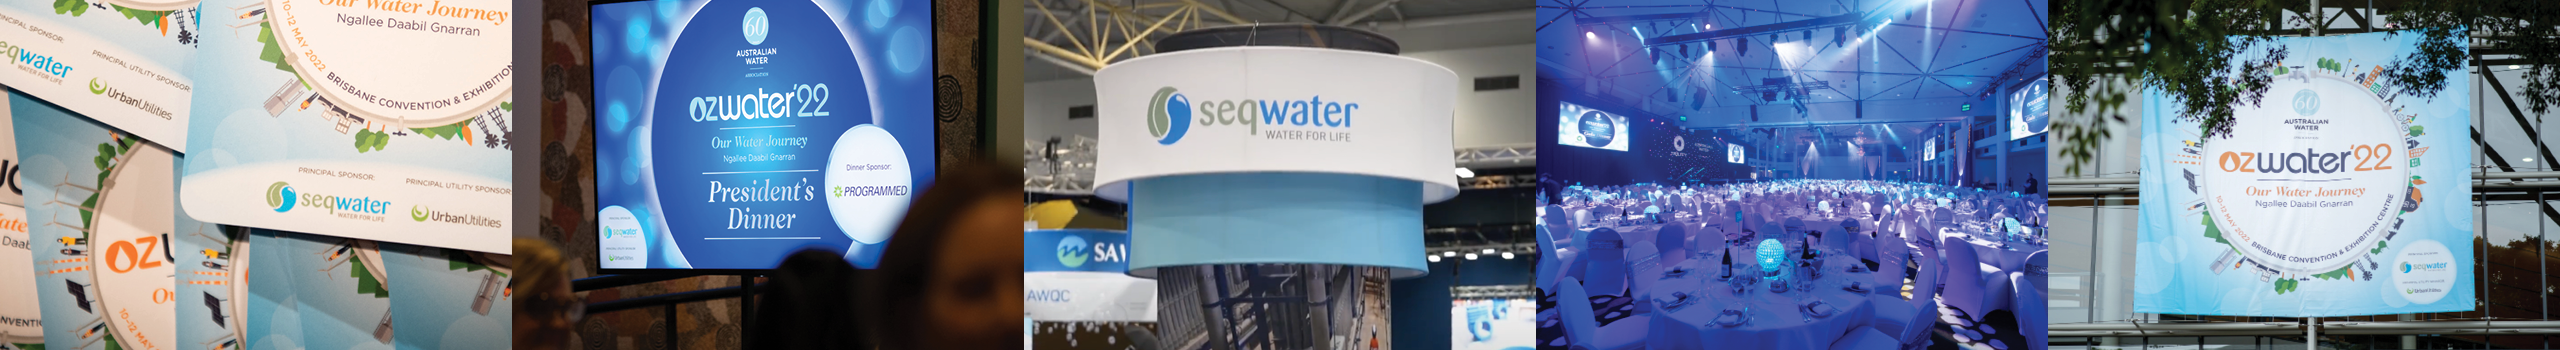 Ozwater Sponsors